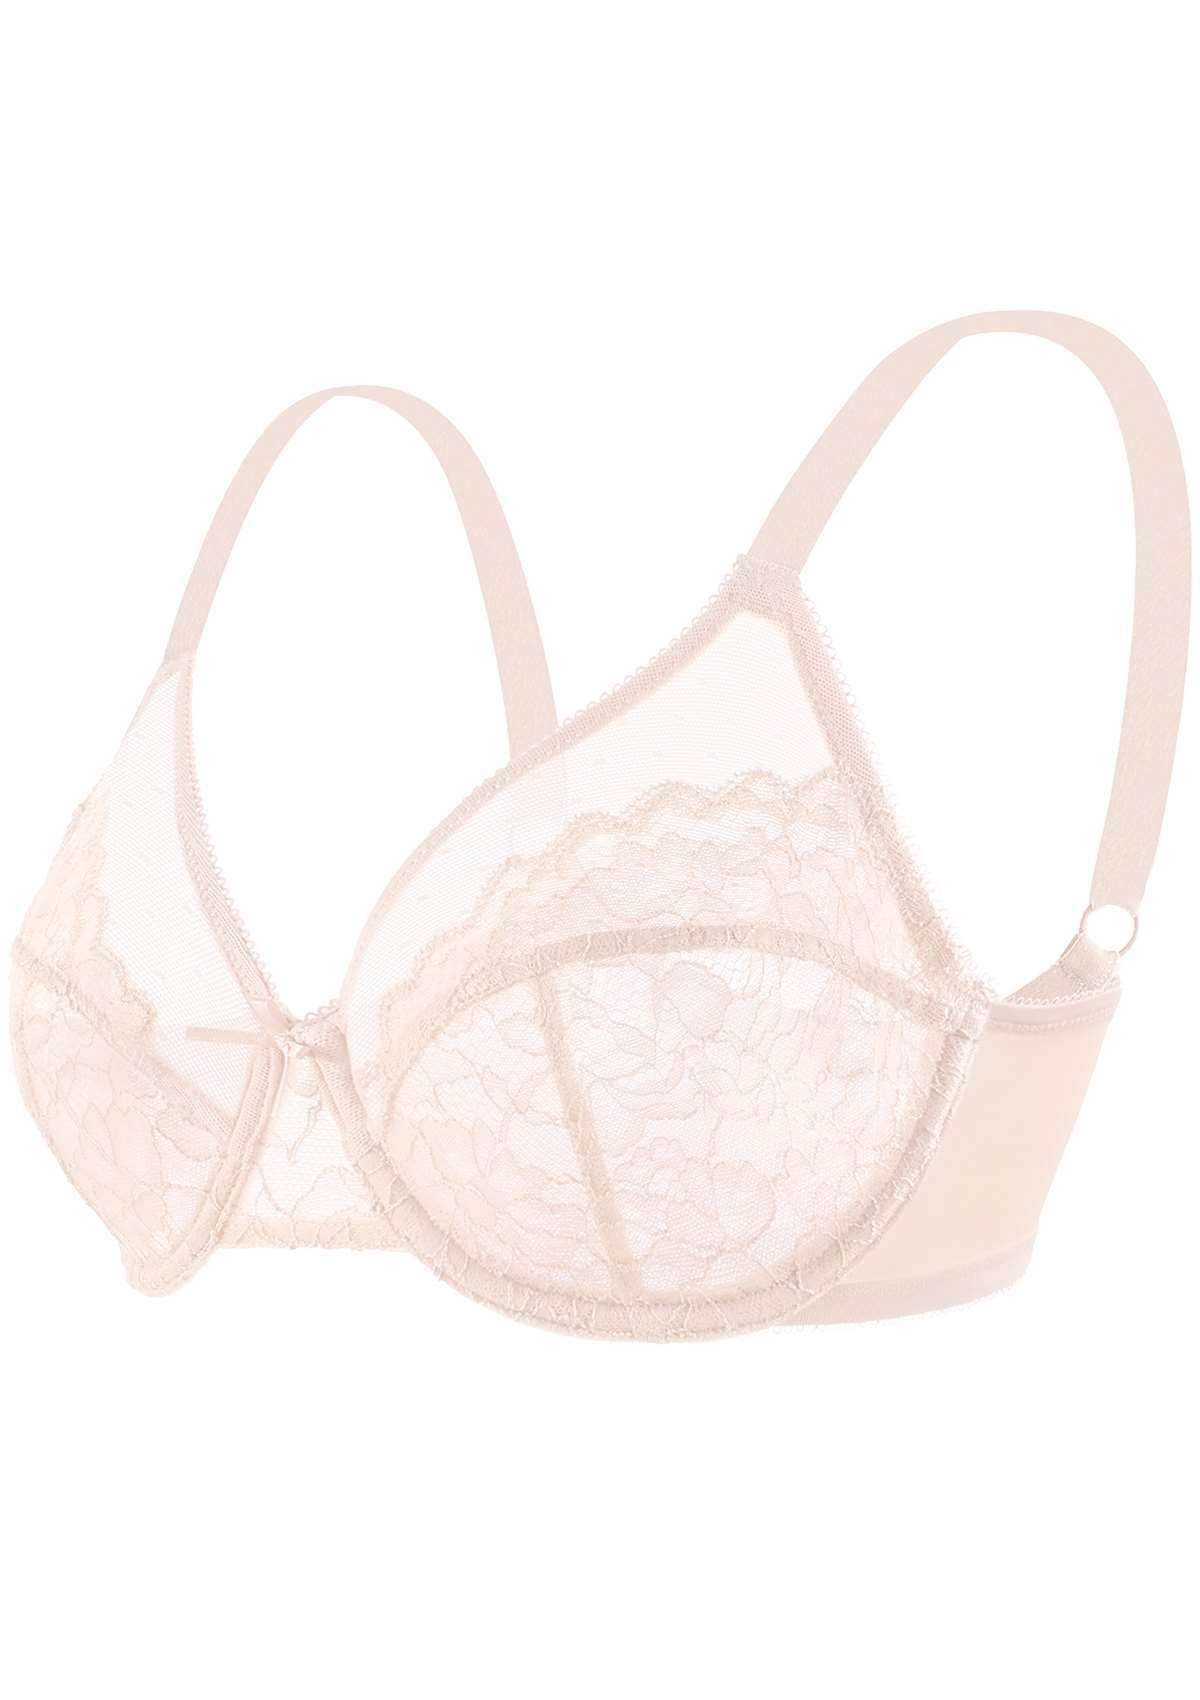 HSIA Enchante Lacy Bra: Comfy Sheer Lace Bra With Lift - Pink / 42 / H